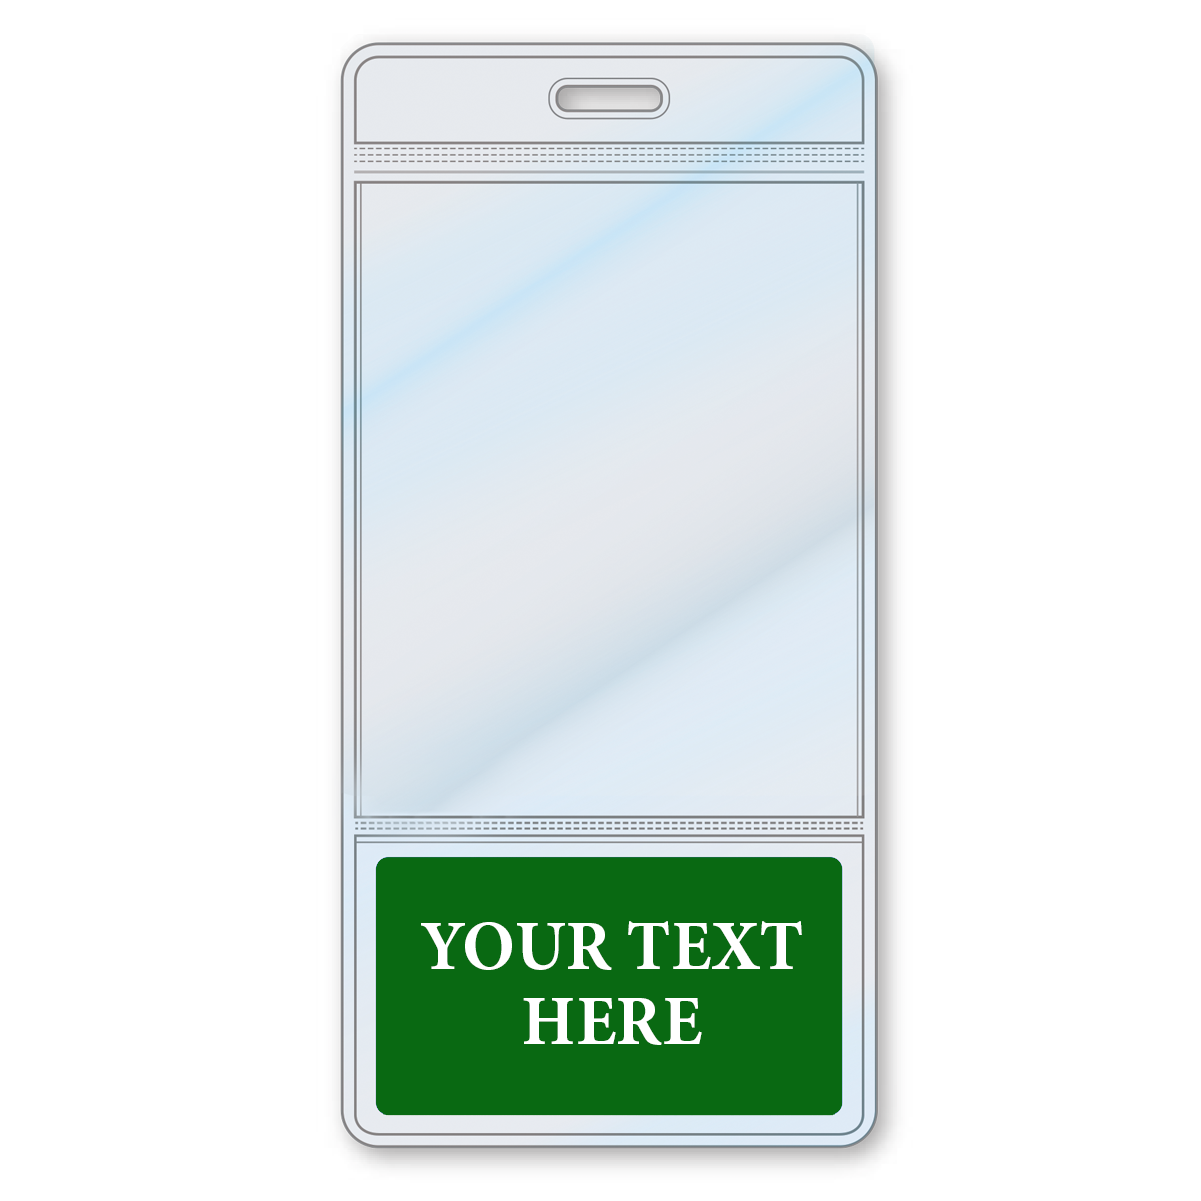 A Custom Printed BadgeBottoms® Vertical (Badge Holder & Badge Buddy IN ONE!!) with a transparent top section and a green bottom section that features the text "YOUR TEXT HERE" in white. This role identifying badge holder is perfect for displaying your information clearly.